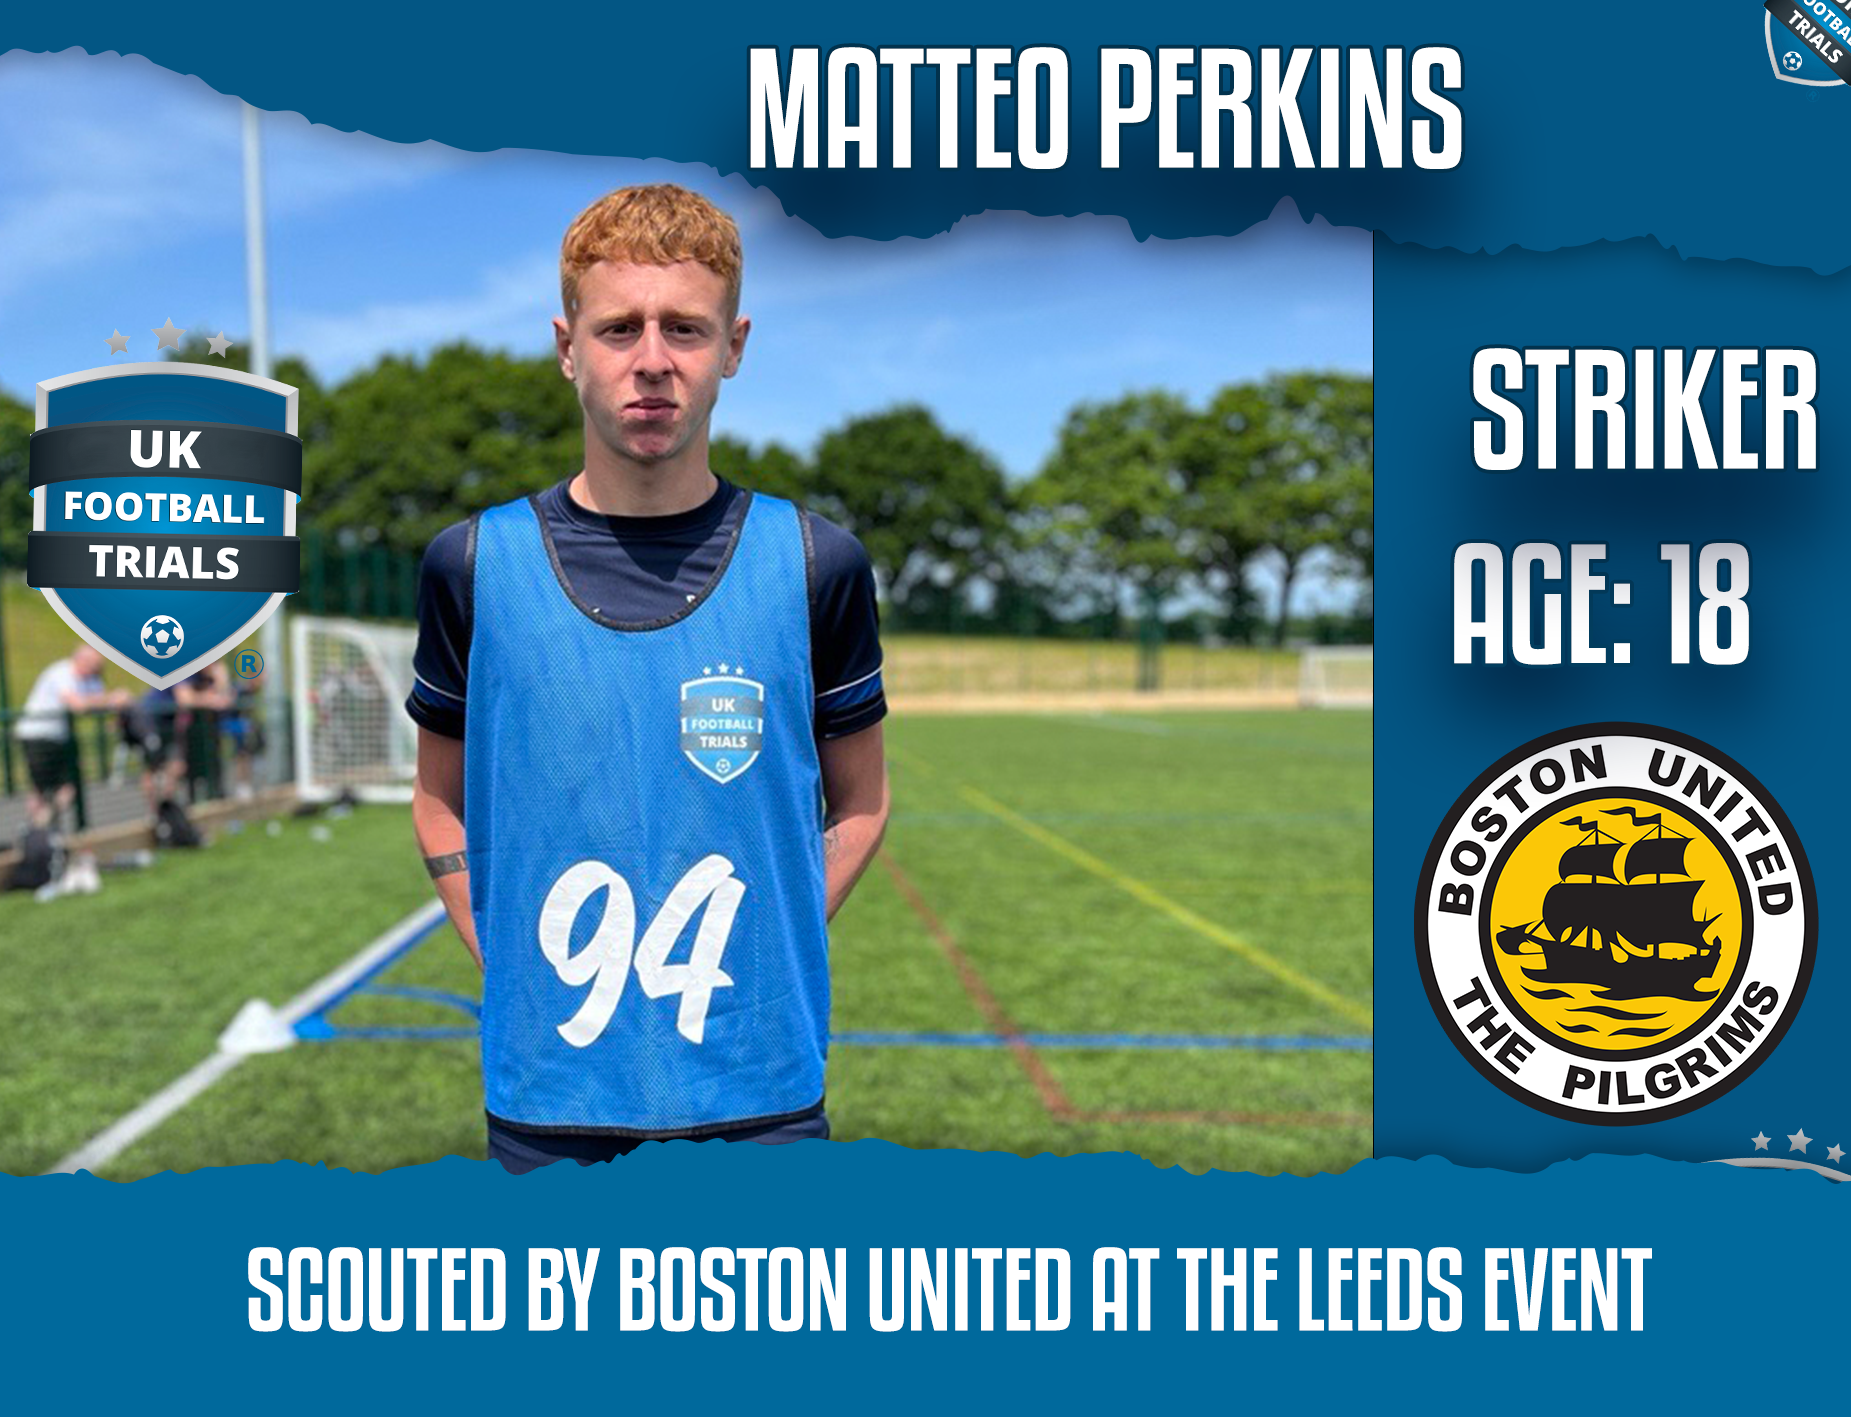 Matteo Perkins - Age 18 - Scouted by Boston United